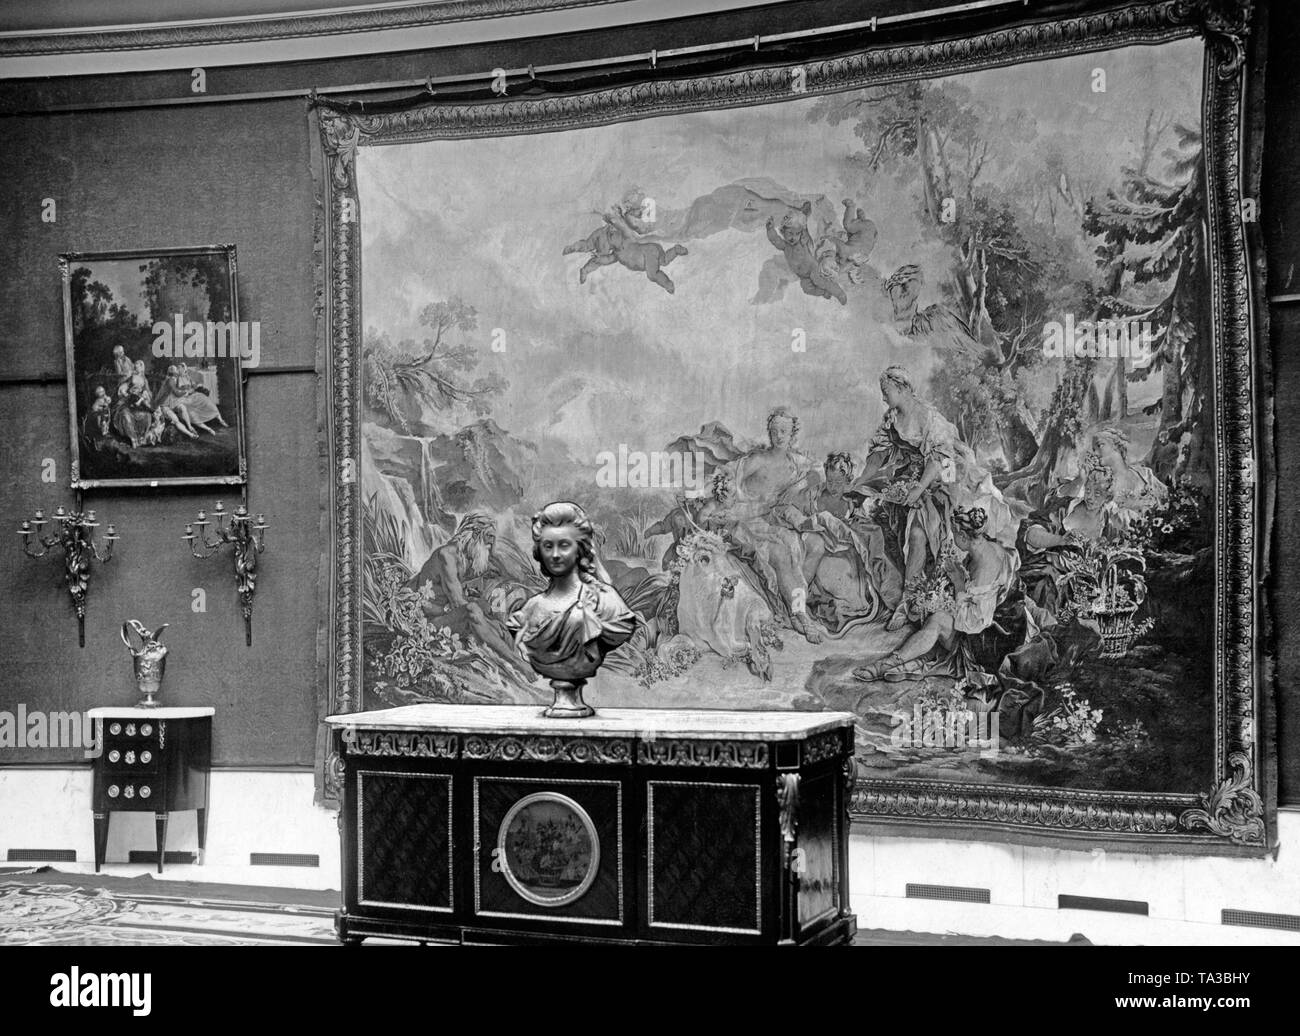 In the auction house Lepke in Berlin art treasures from Russian private property were auctioned at the instigation of the Soviet government. Due to numerous complaints by Russian emigrants in Berlin, the district court ordered a break in the auction and the exclusion of some pieces from the auction a short time later. Stock Photo